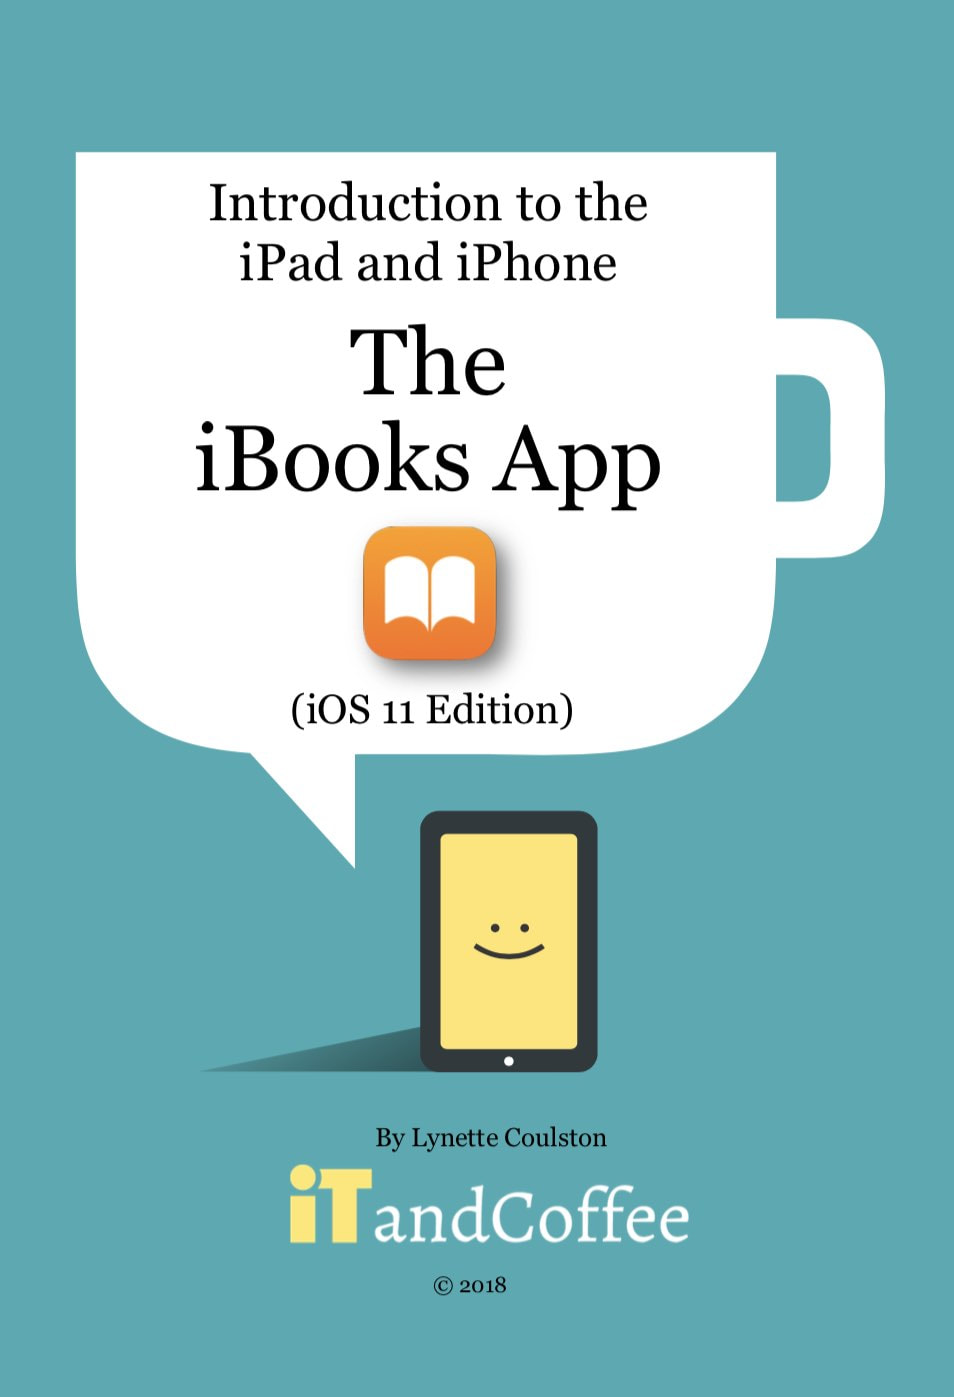 A guide to the iBooks app on the iPad and iPhone